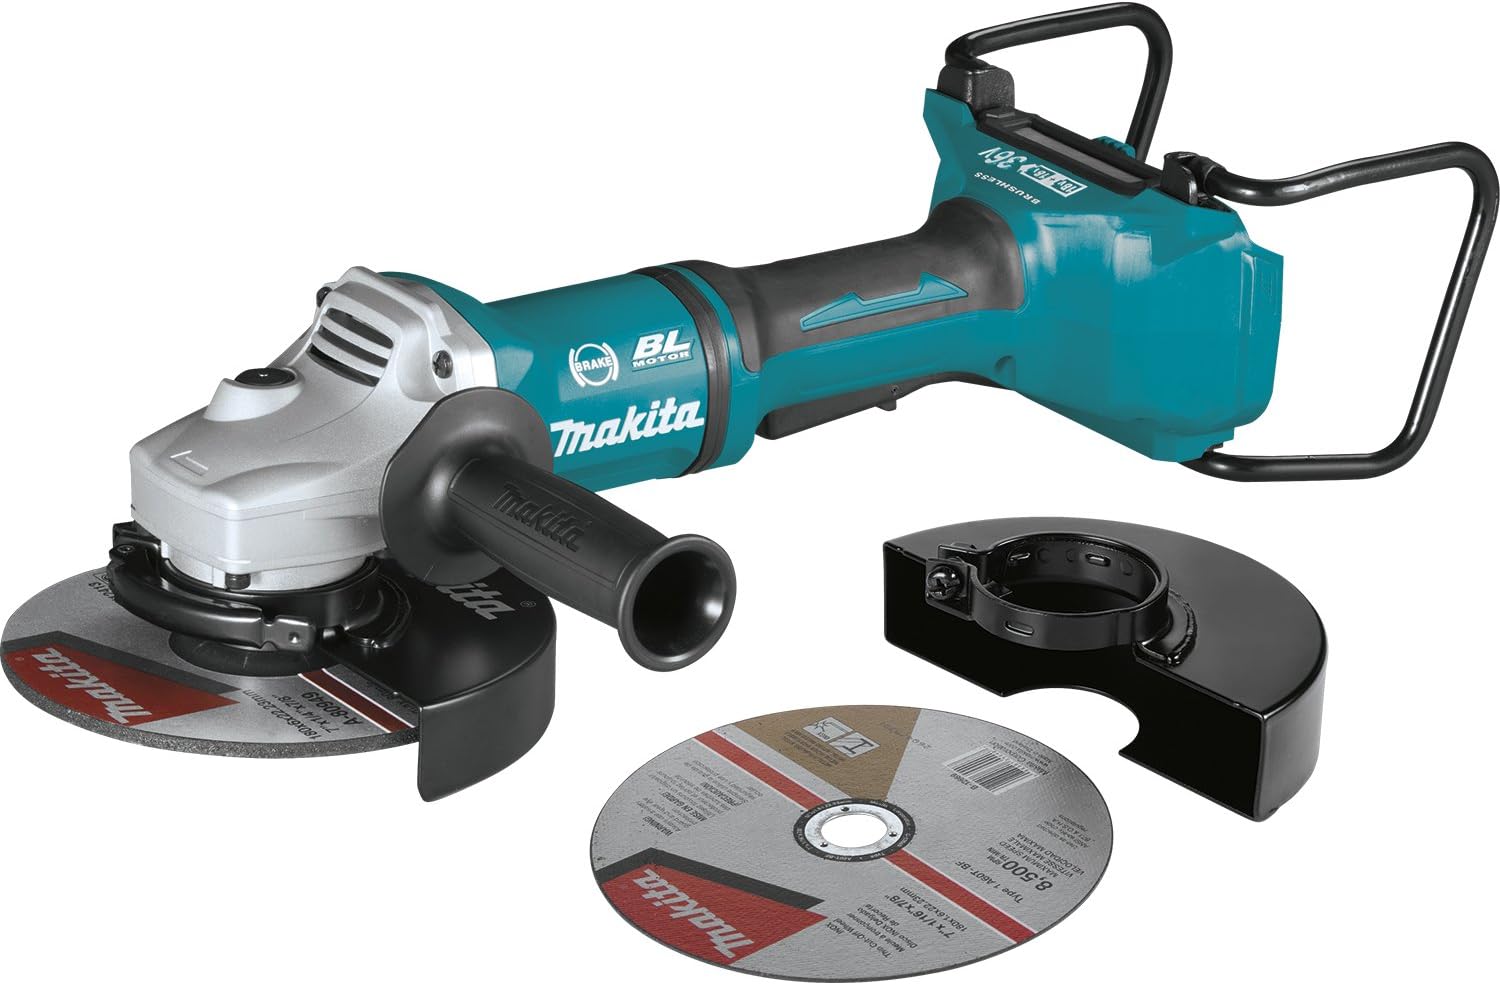 Makita XAG12Z1 18V X2 LXT Lithium-Ion 36V Brushless Cordless 7 Paddle Switch Cut-Off/Angle Grinder, with Electric Brake, Tool Only